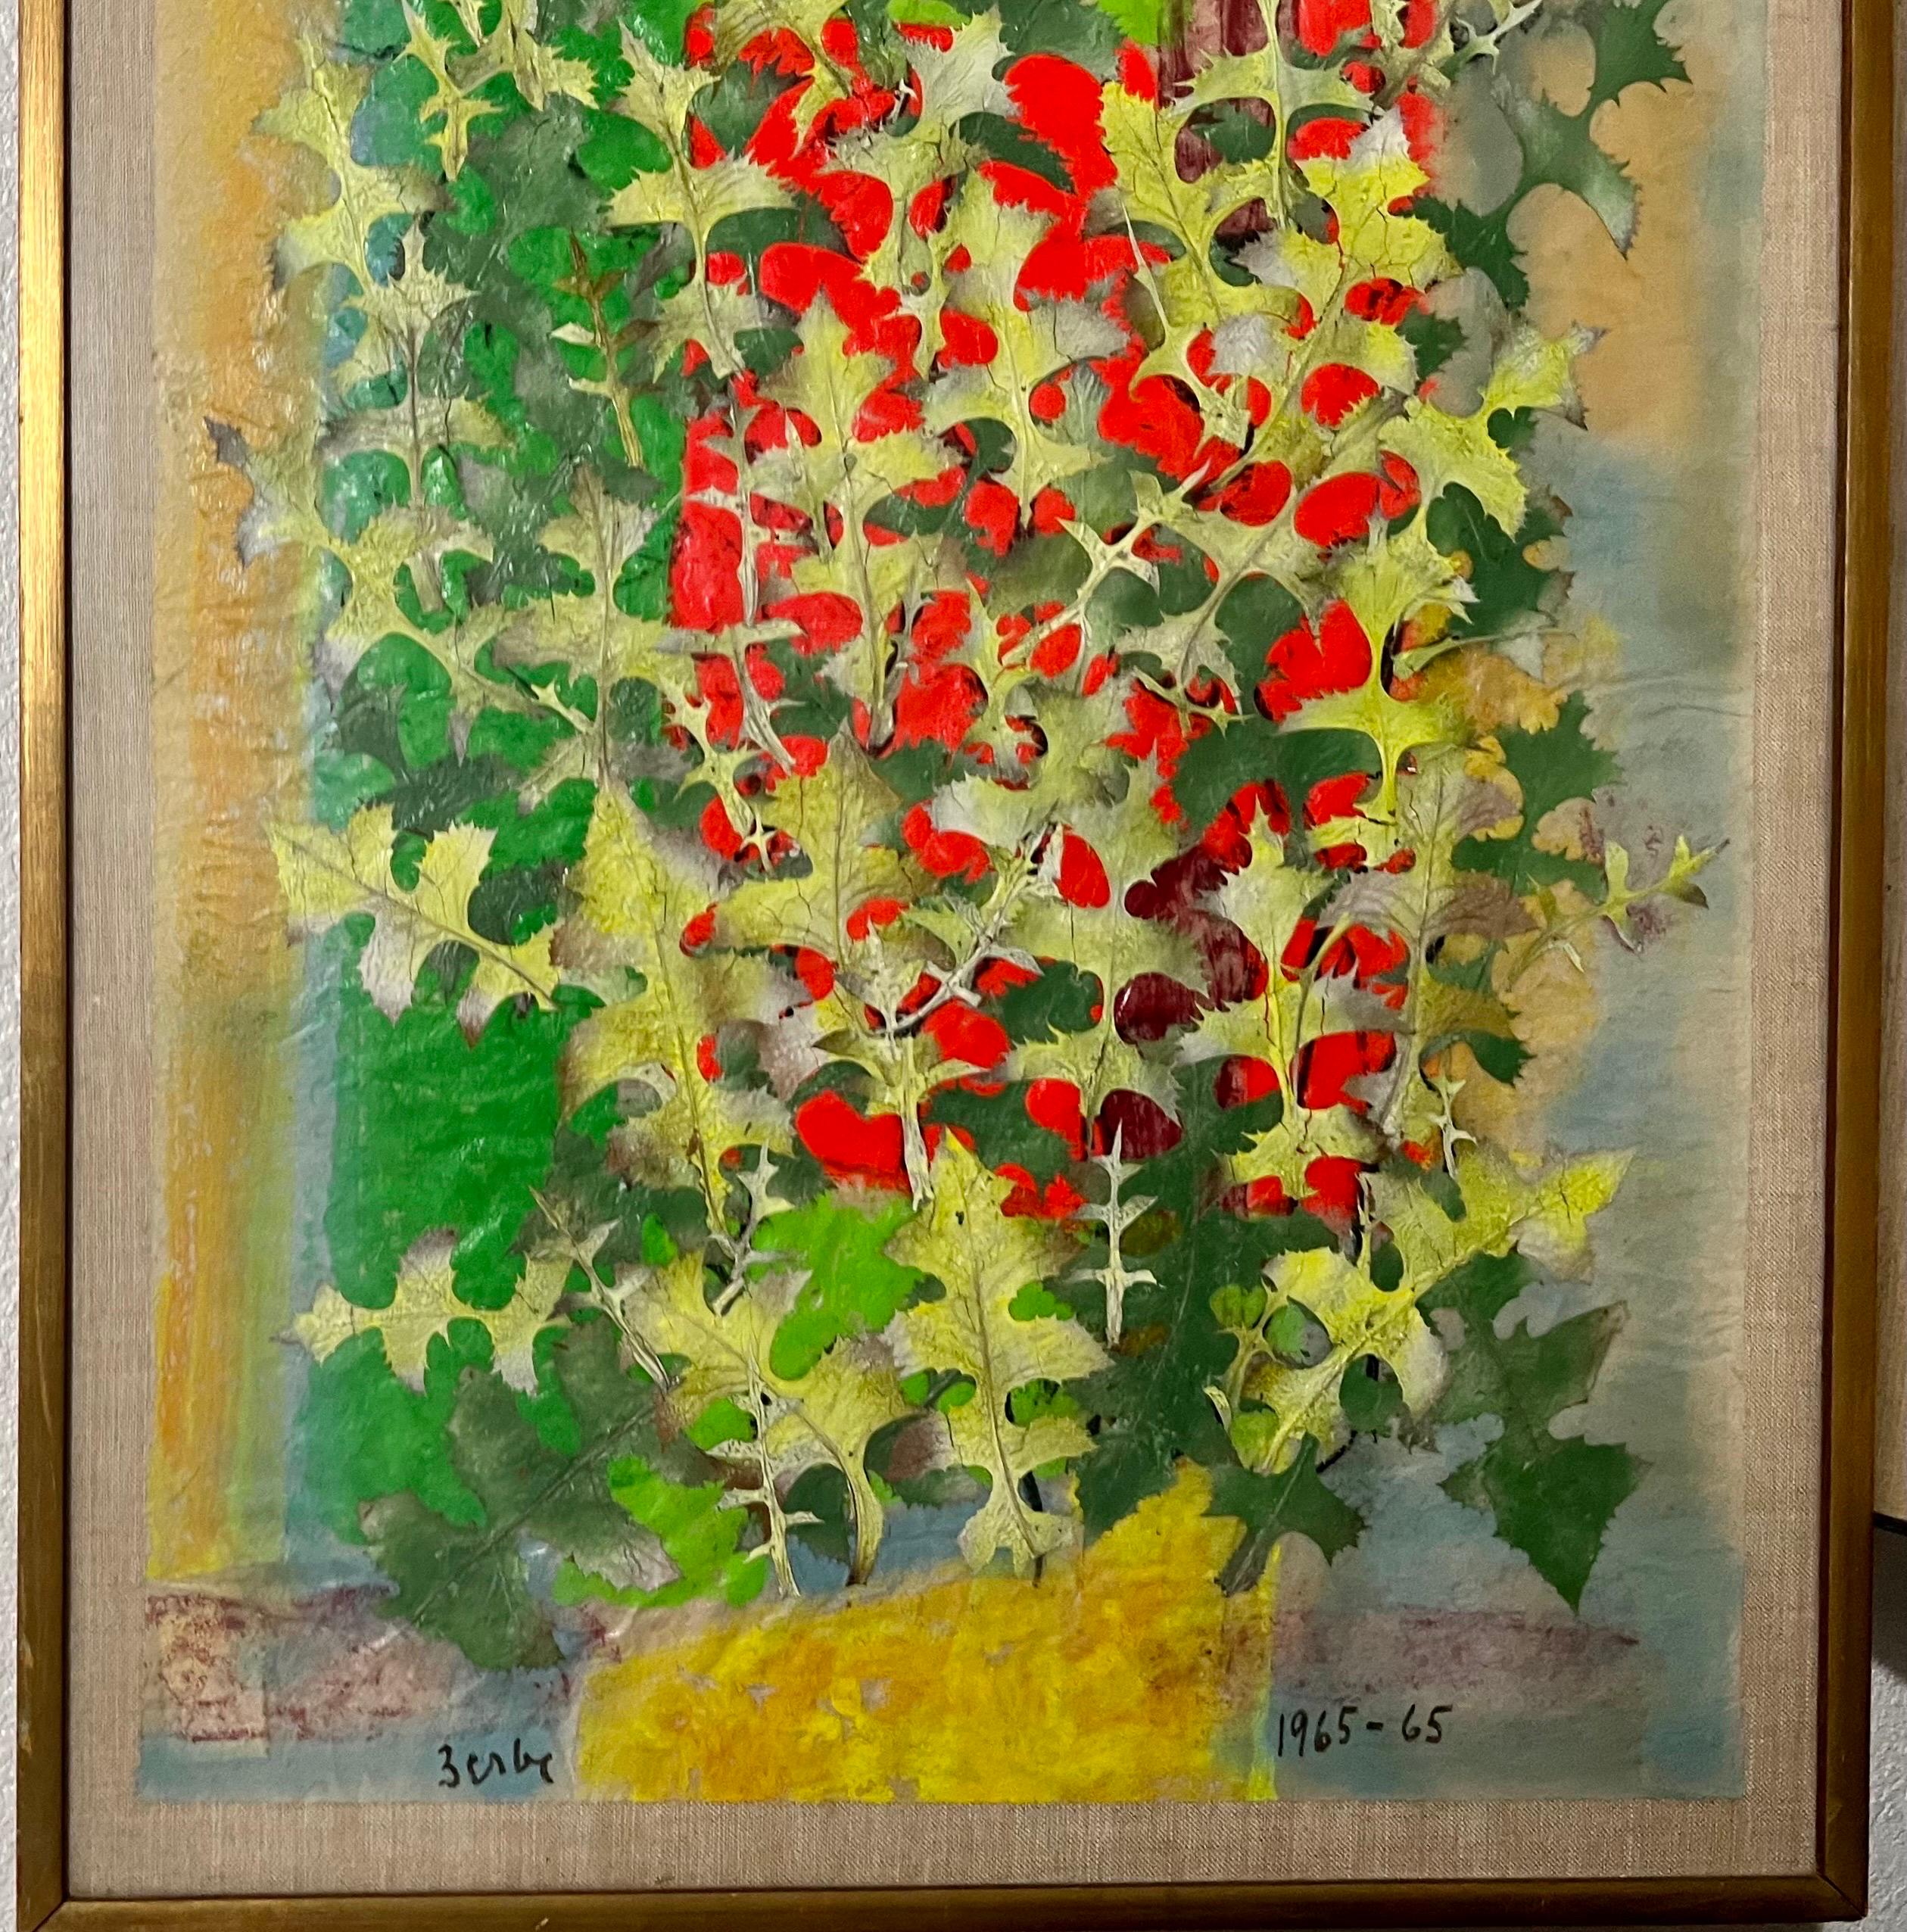 Boston Modernist Painting Floral Foliage Collage German Expressionist Karl Zerbe For Sale 6